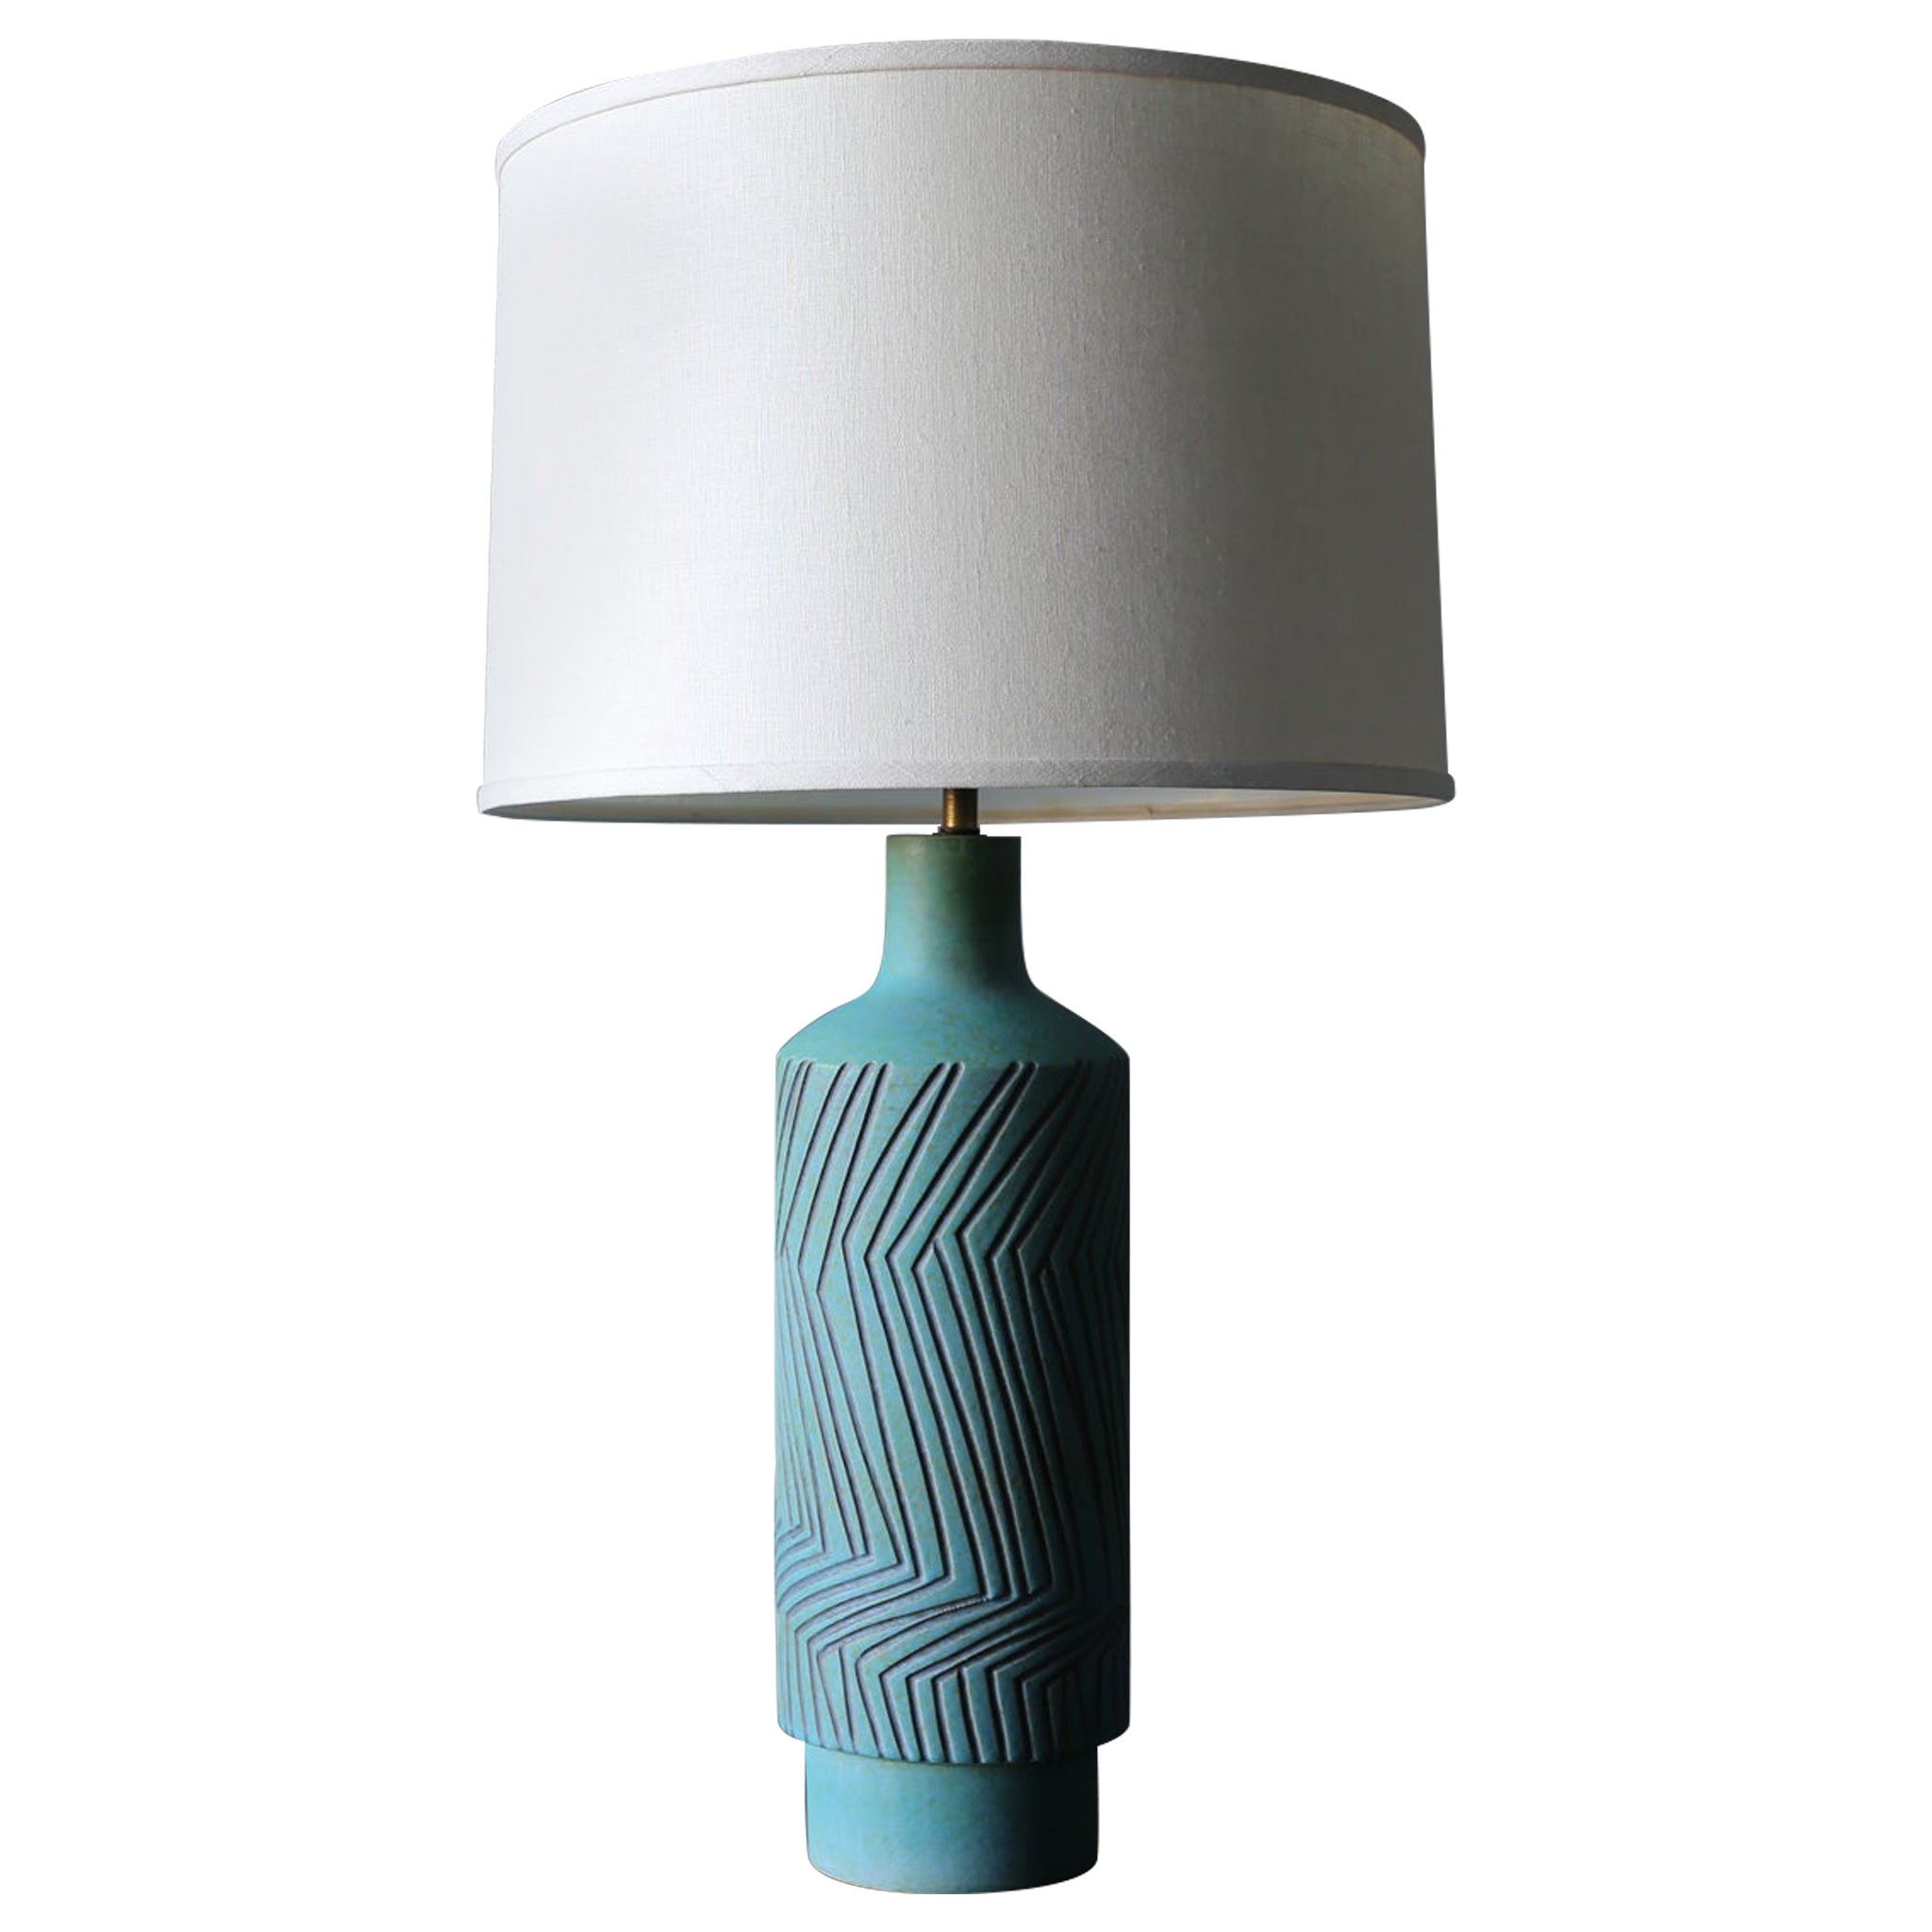 Raymor Ceramic Table Lamp, Italy, c.1960 For Sale